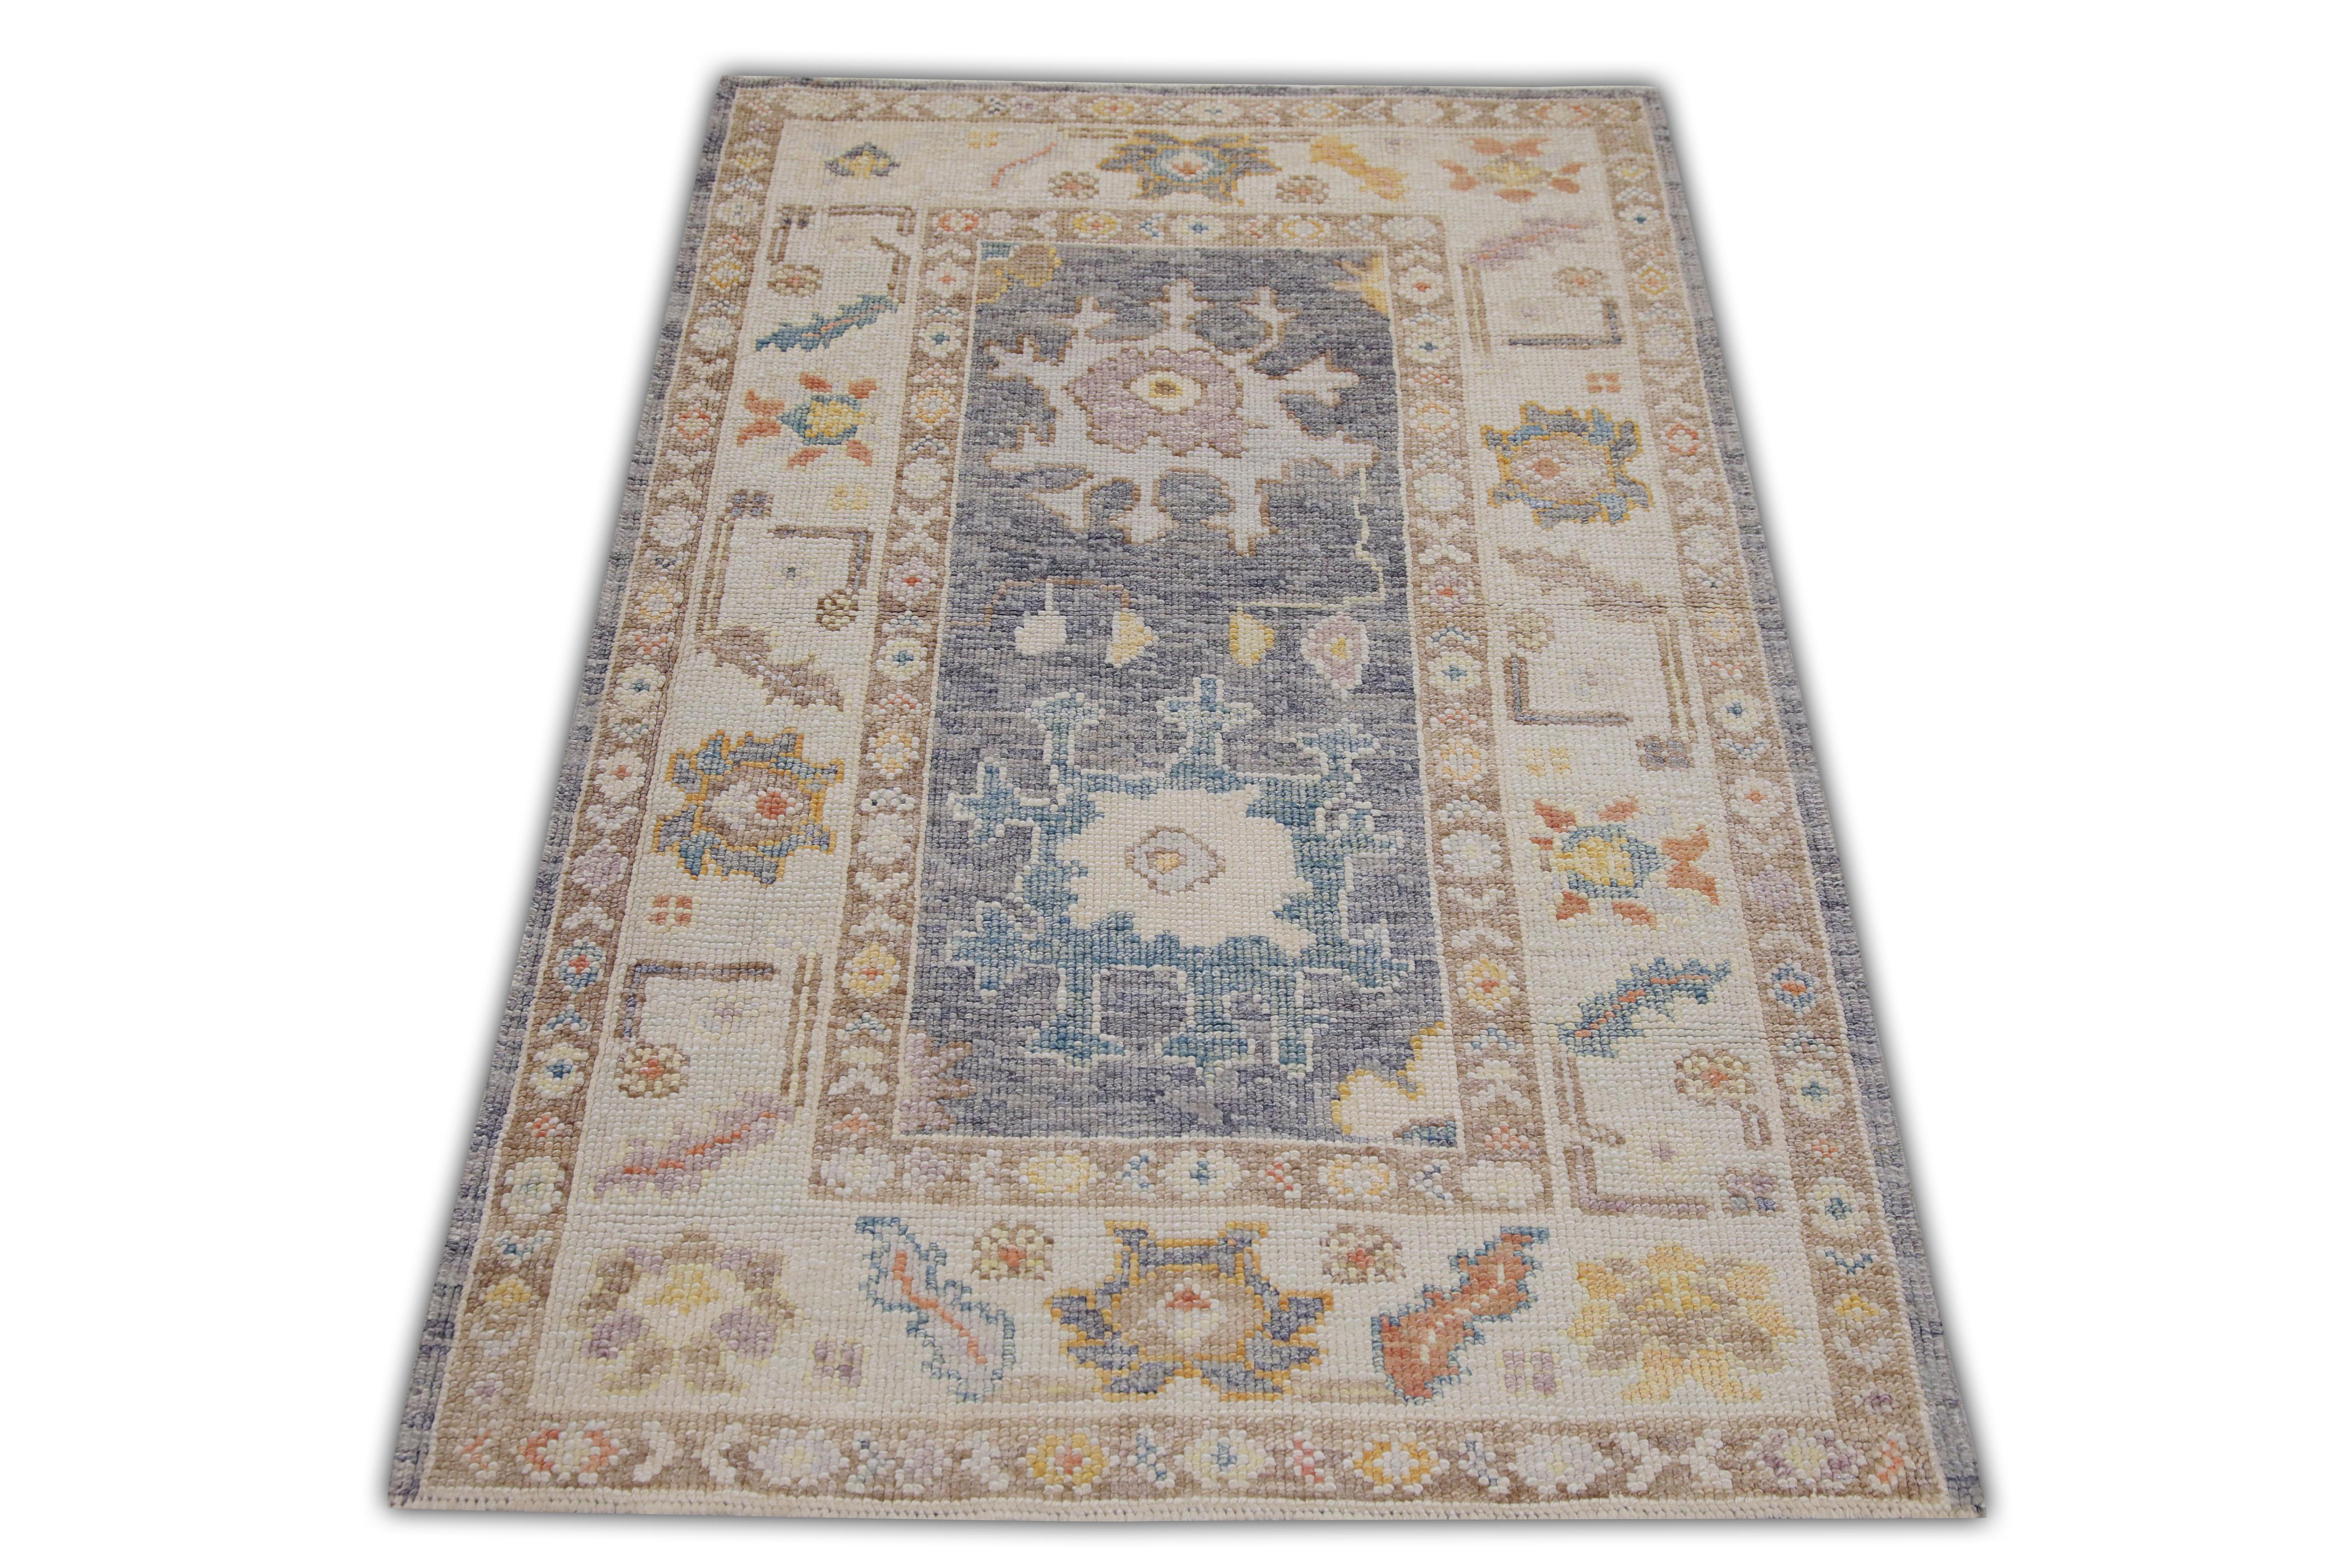 This Turkish oushak rug is a stunning piece of art that has been handwoven using traditional techniques by skilled artisans. The rug features intricate patterns and a soft color palette that is achieved through the use of natural vegetable